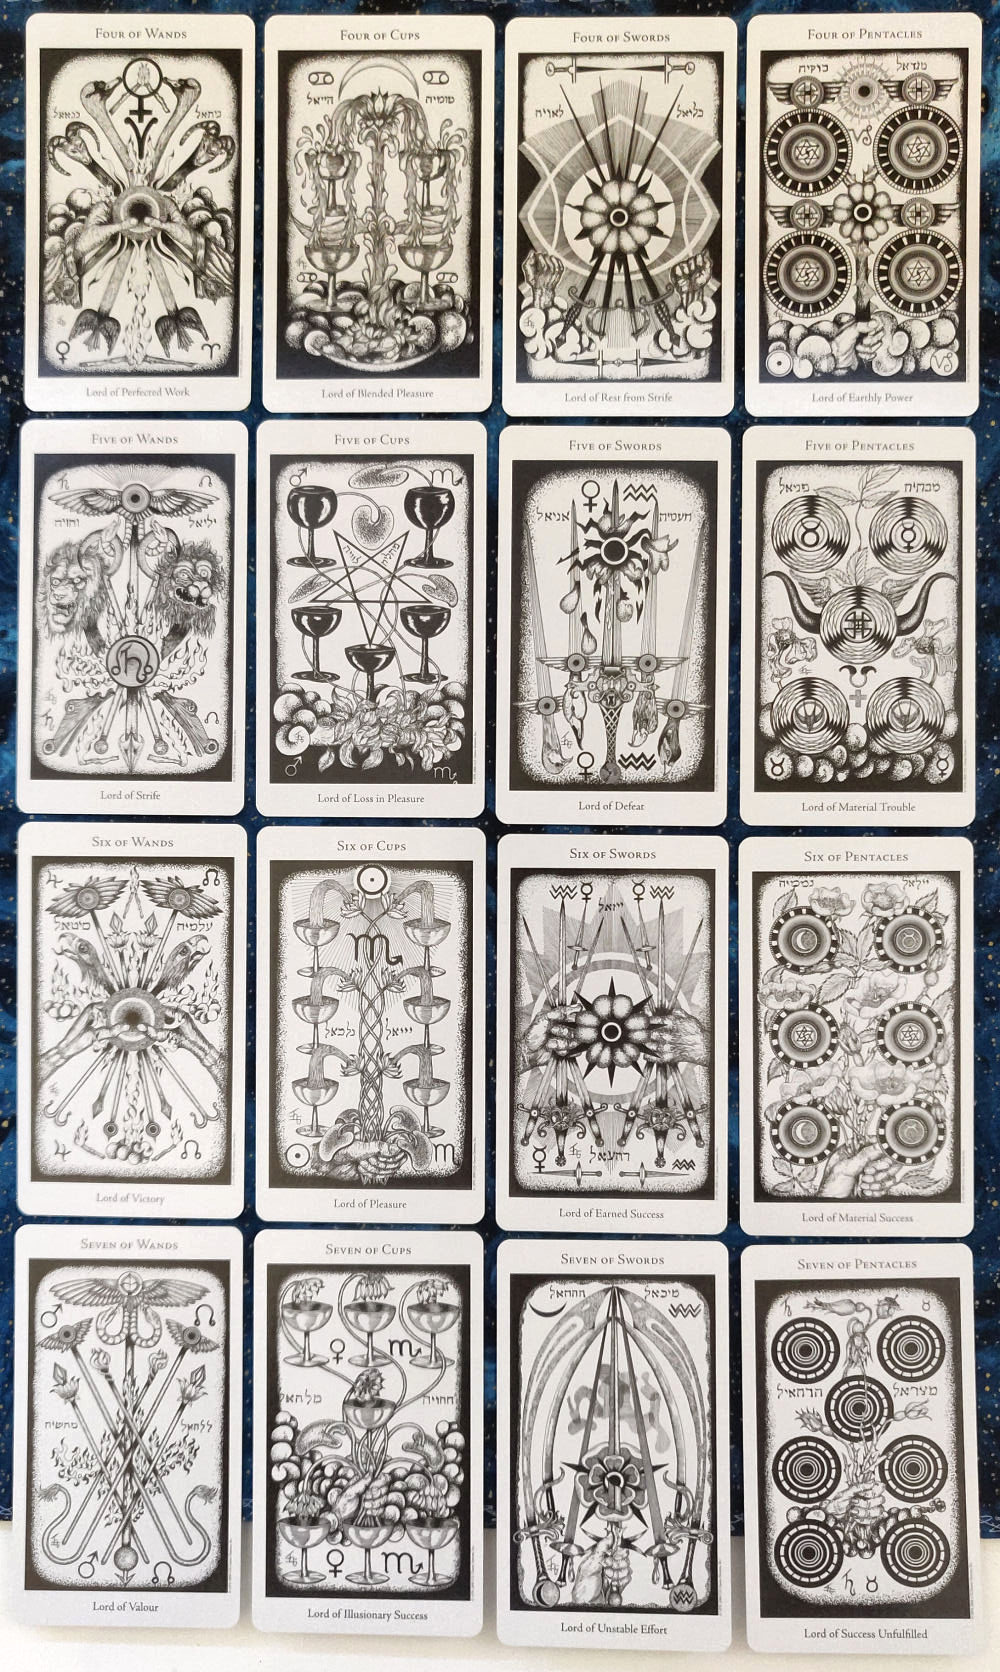 Deck Review – The Hermetic Tarot – The pure and blessed way